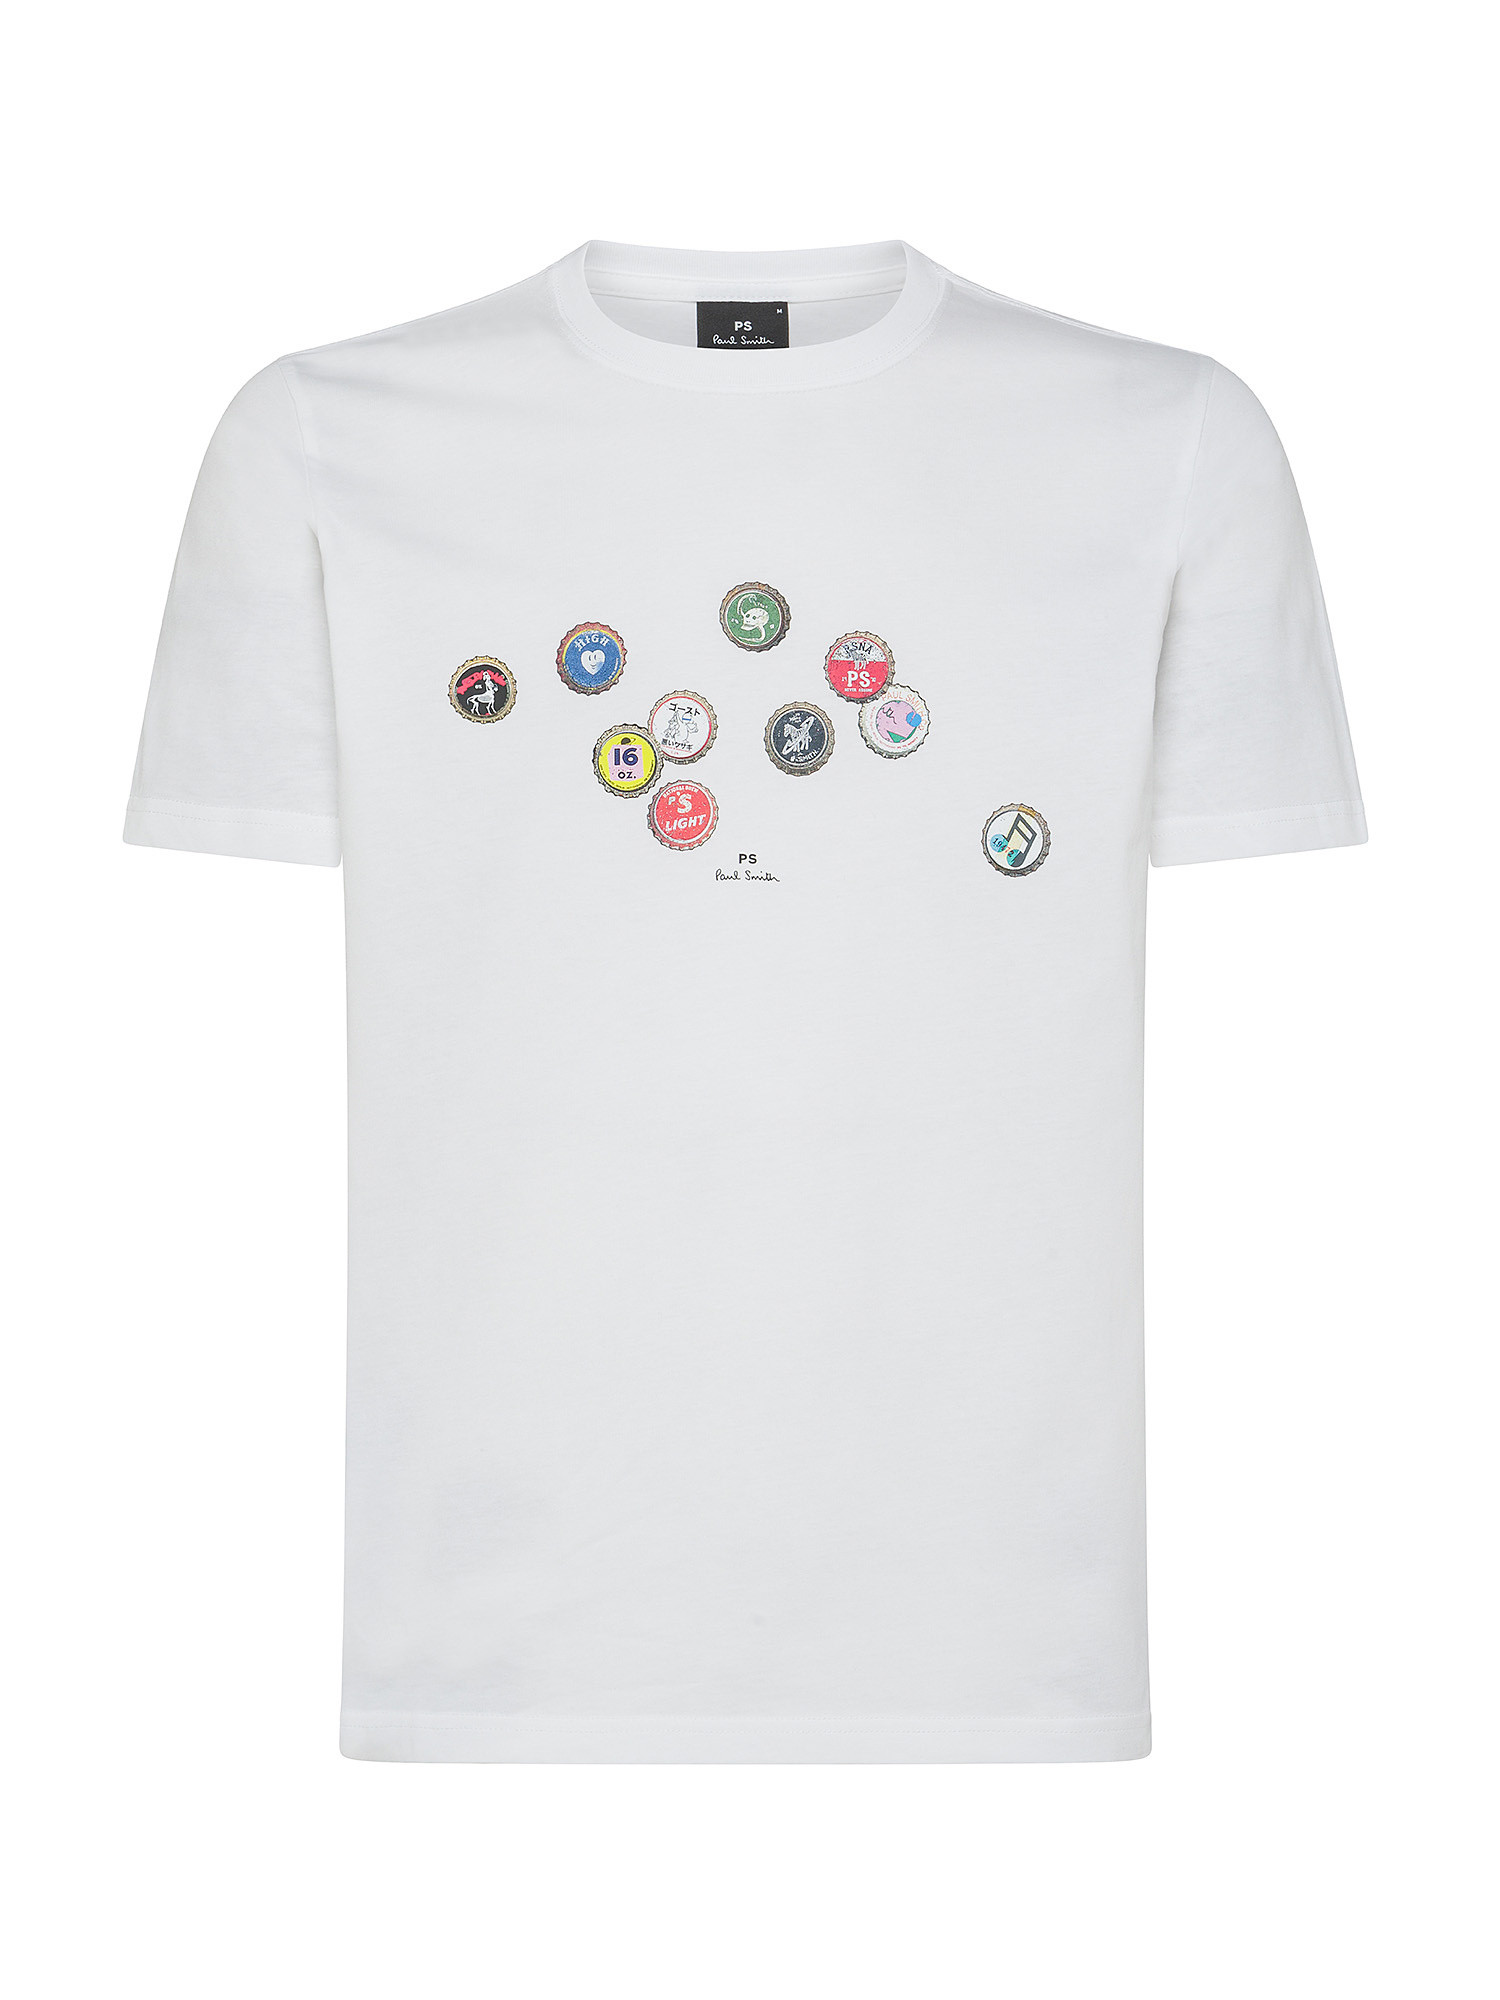 Paul Smith - Cotton T-shirt with bottle cap print, White, large image number 0